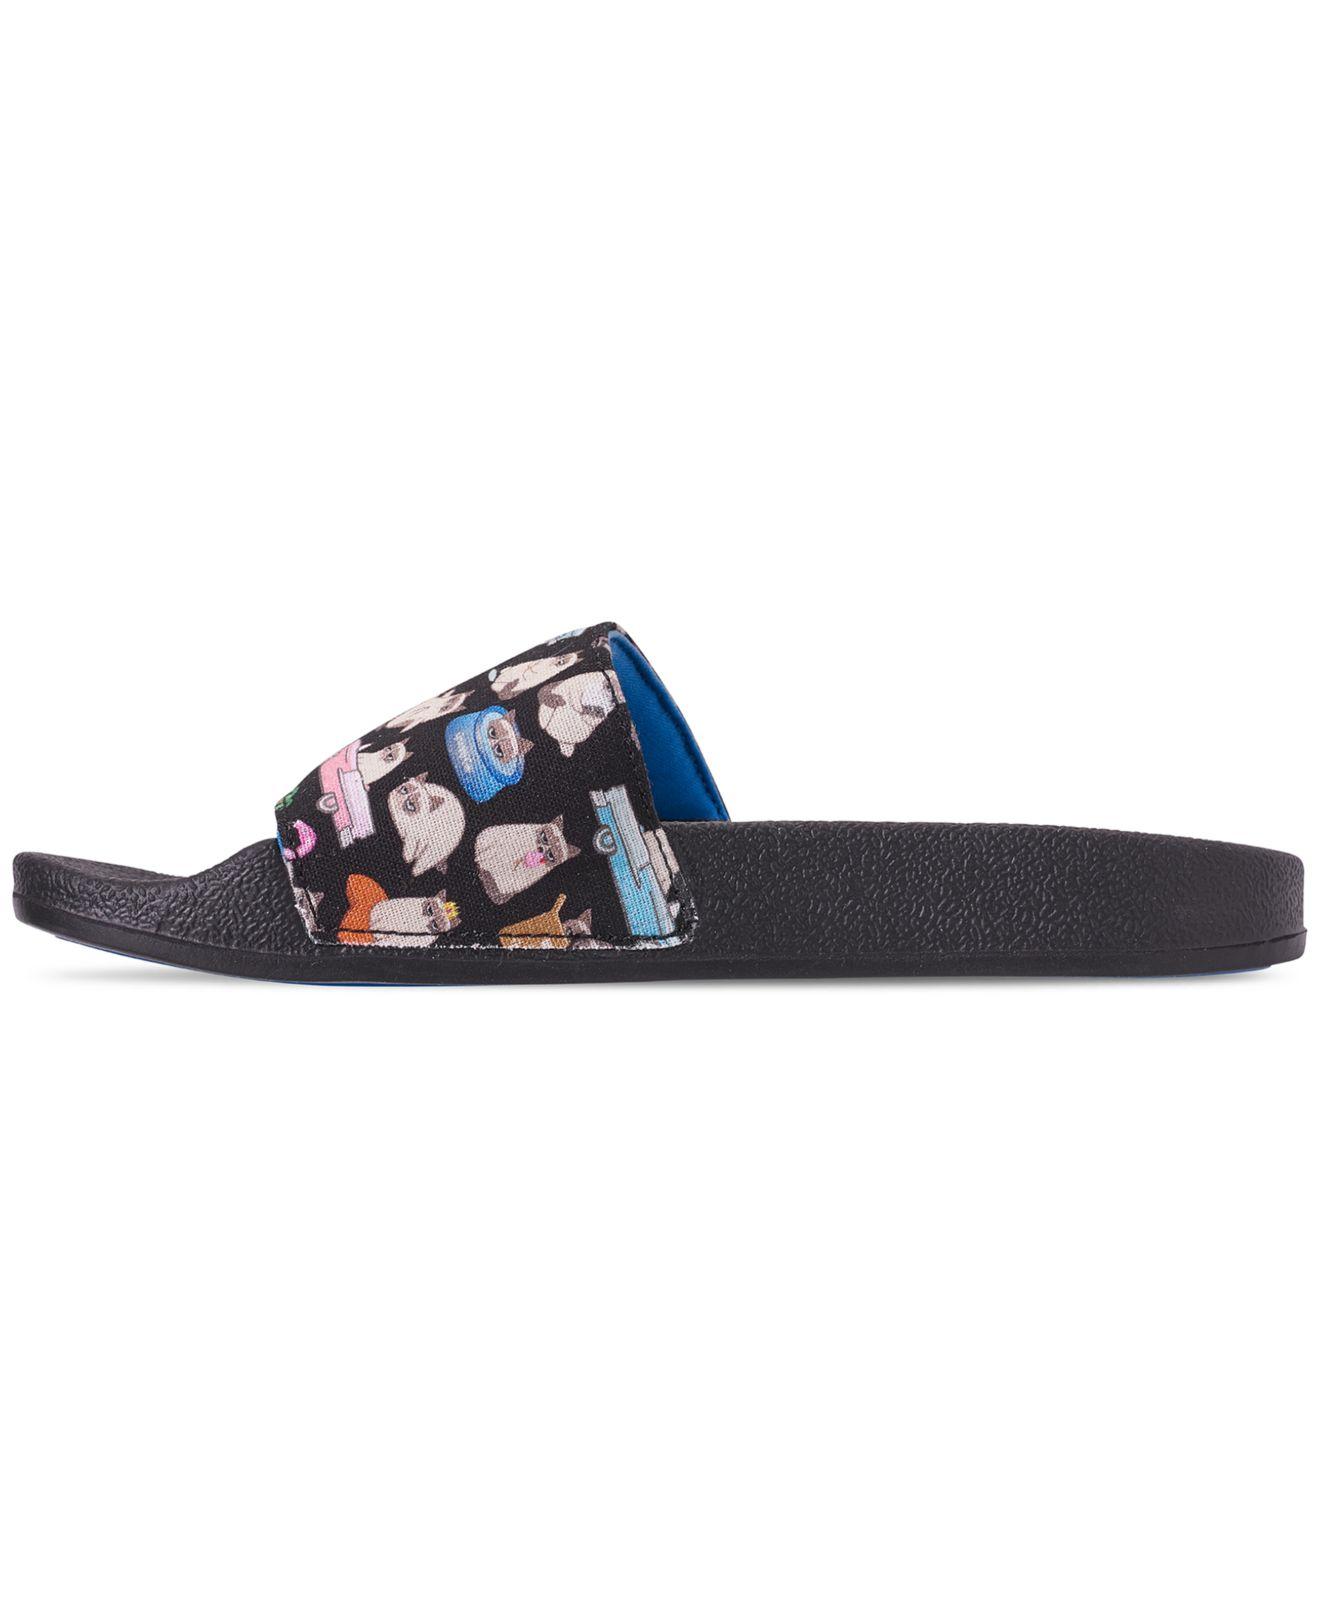 Skechers Rubber Bobs Pop Ups - Blah-cation Bobs For Dogs And Cats Slide ...